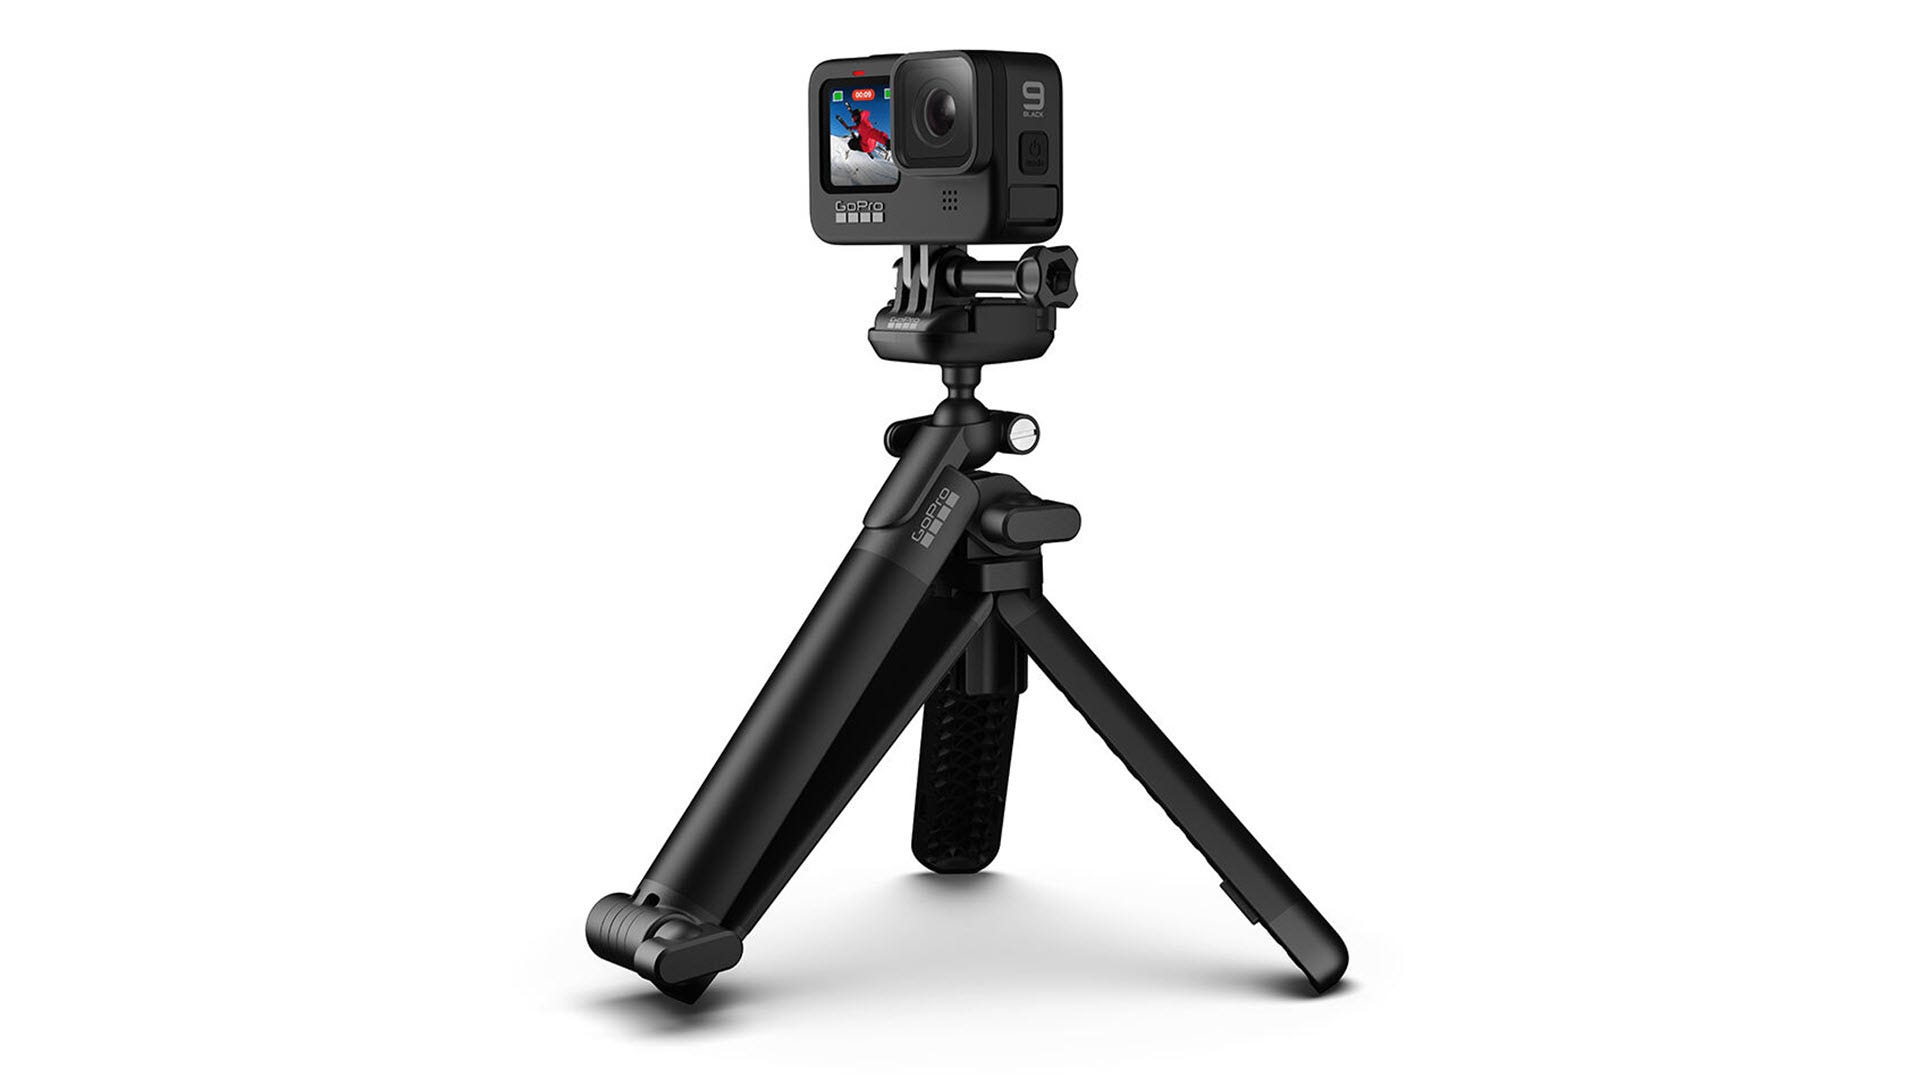 A GoPro on a 3-Way mount in compact tripod mode